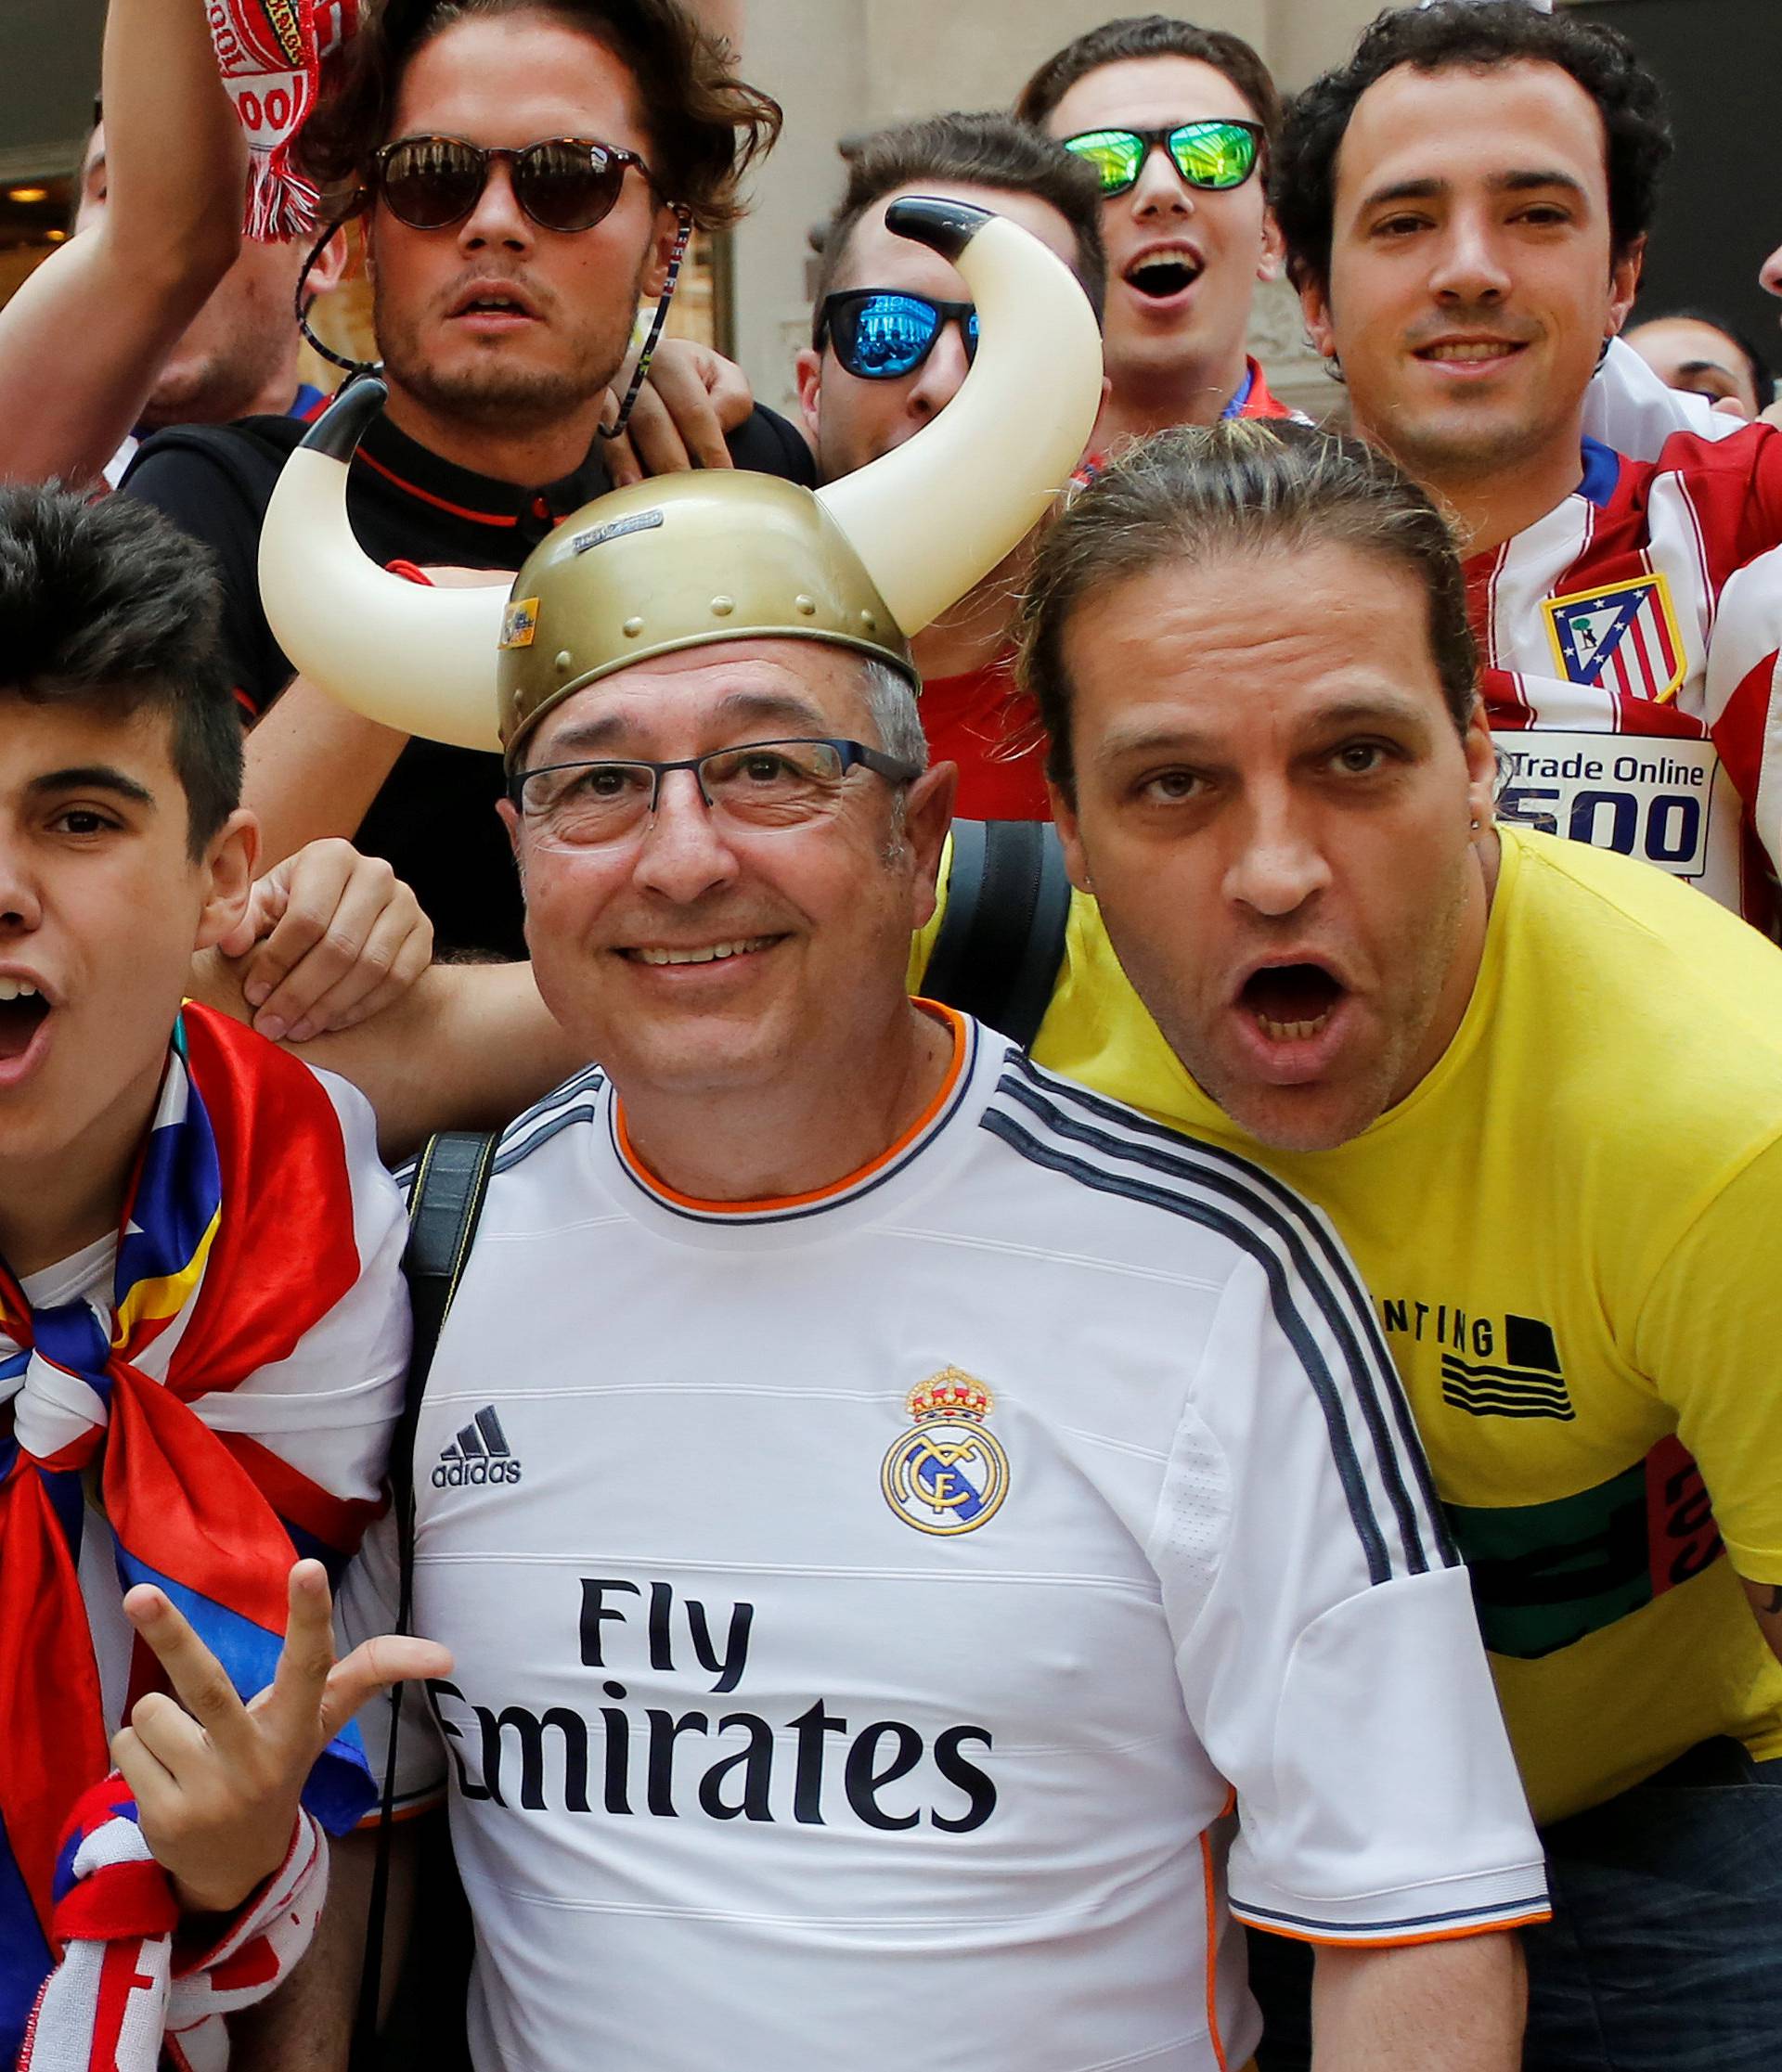 A Real Madrid fan poses with Atletico Madrid fans before the Champions League Final between Real Madrid and Atletico Madrid in Milan